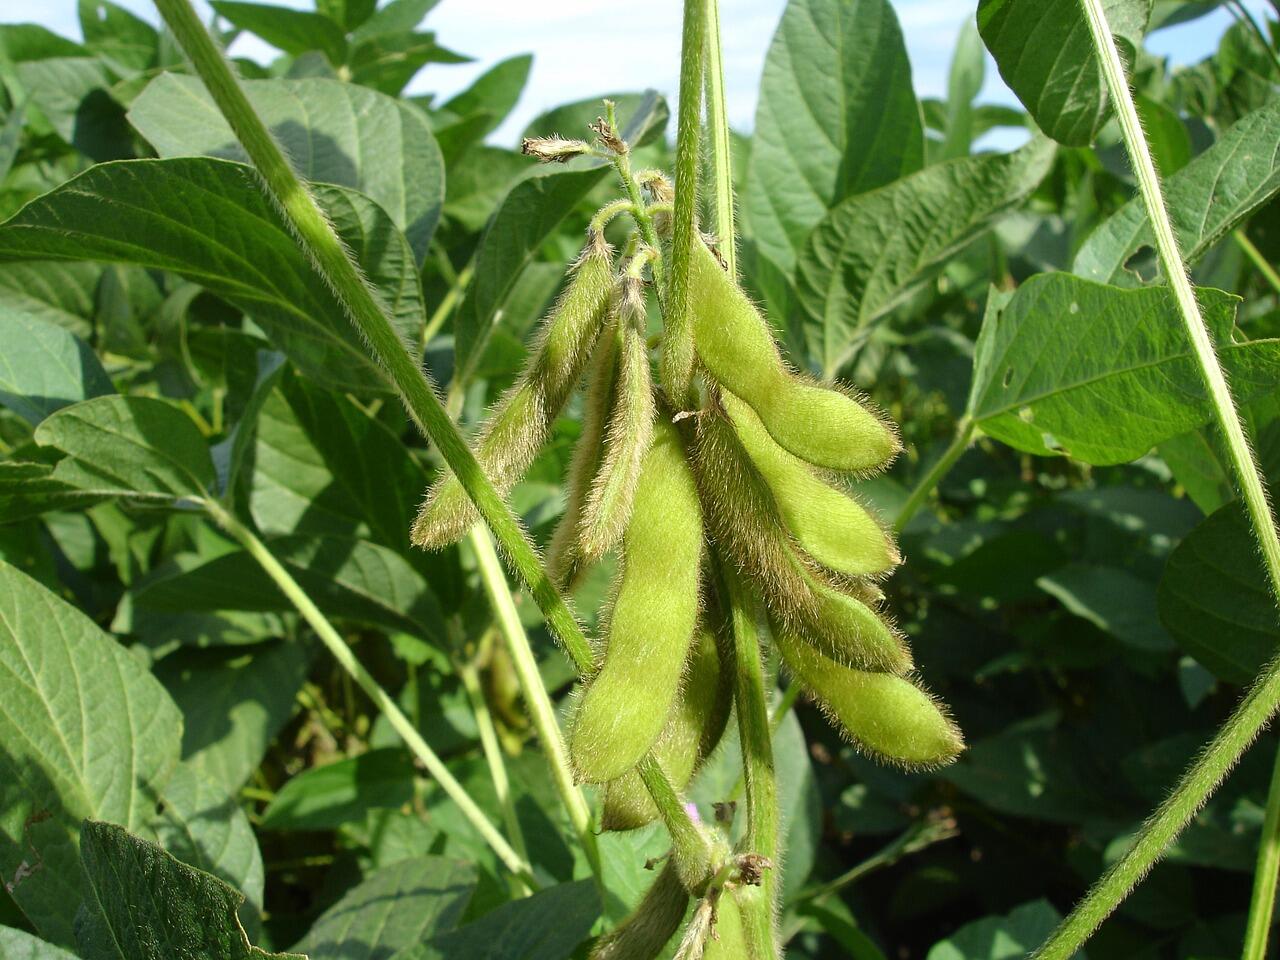 Drones and AI detect soybean maturity with high accuracy